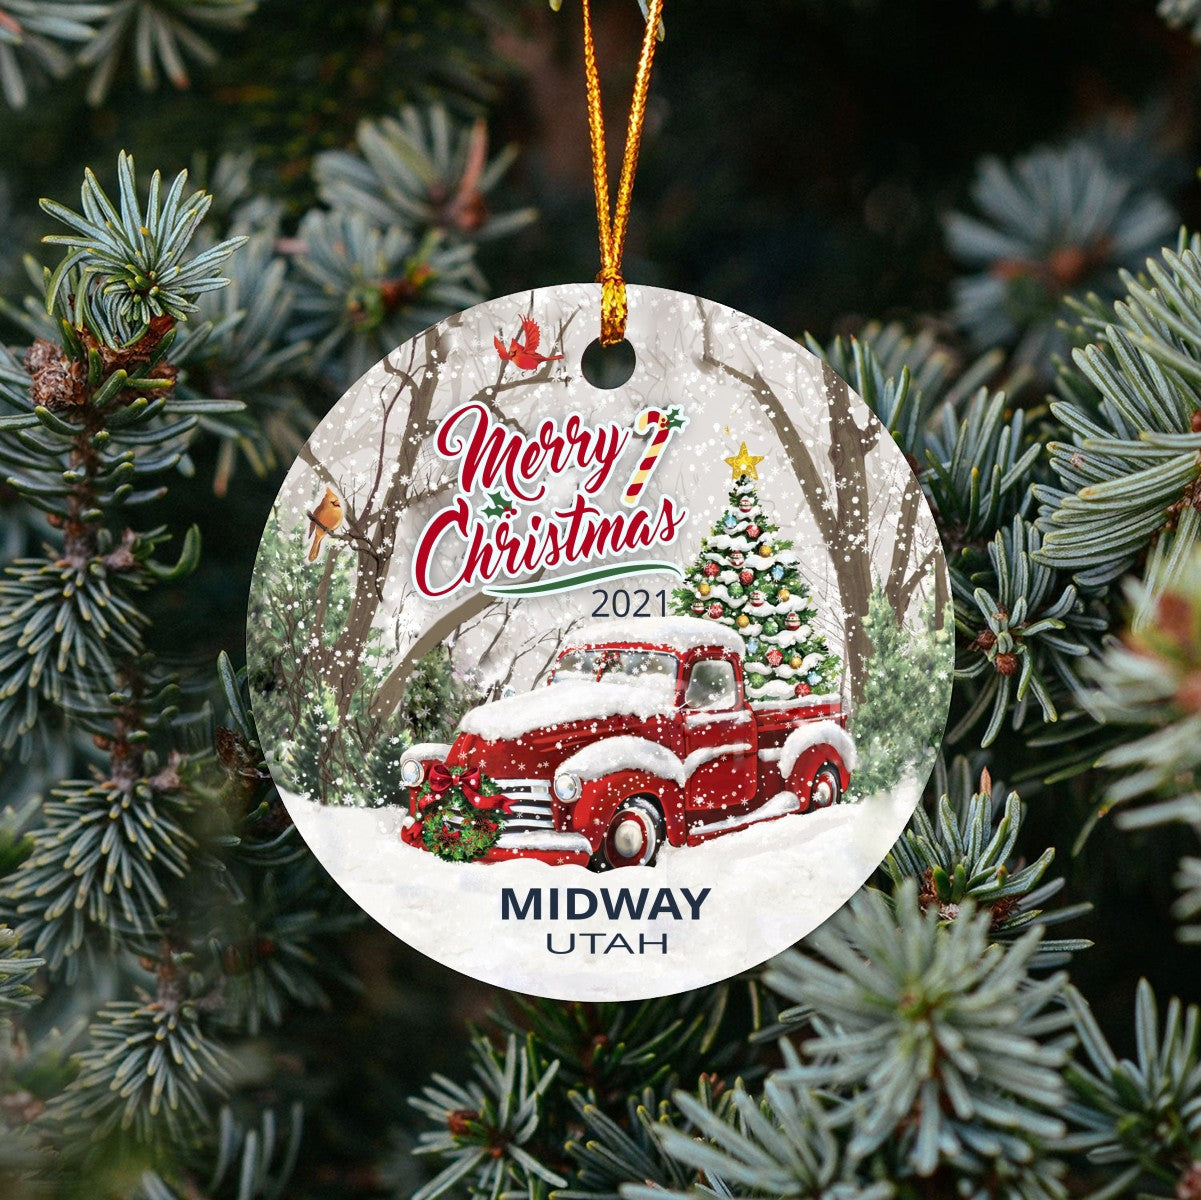 Christmas Tree Ornaments Midway - Ornament Customize With Name City And State Midway Utah UT - Red Truck Xmas Ornaments 3'' Plastic Gift For Family, Friend And Housewarming